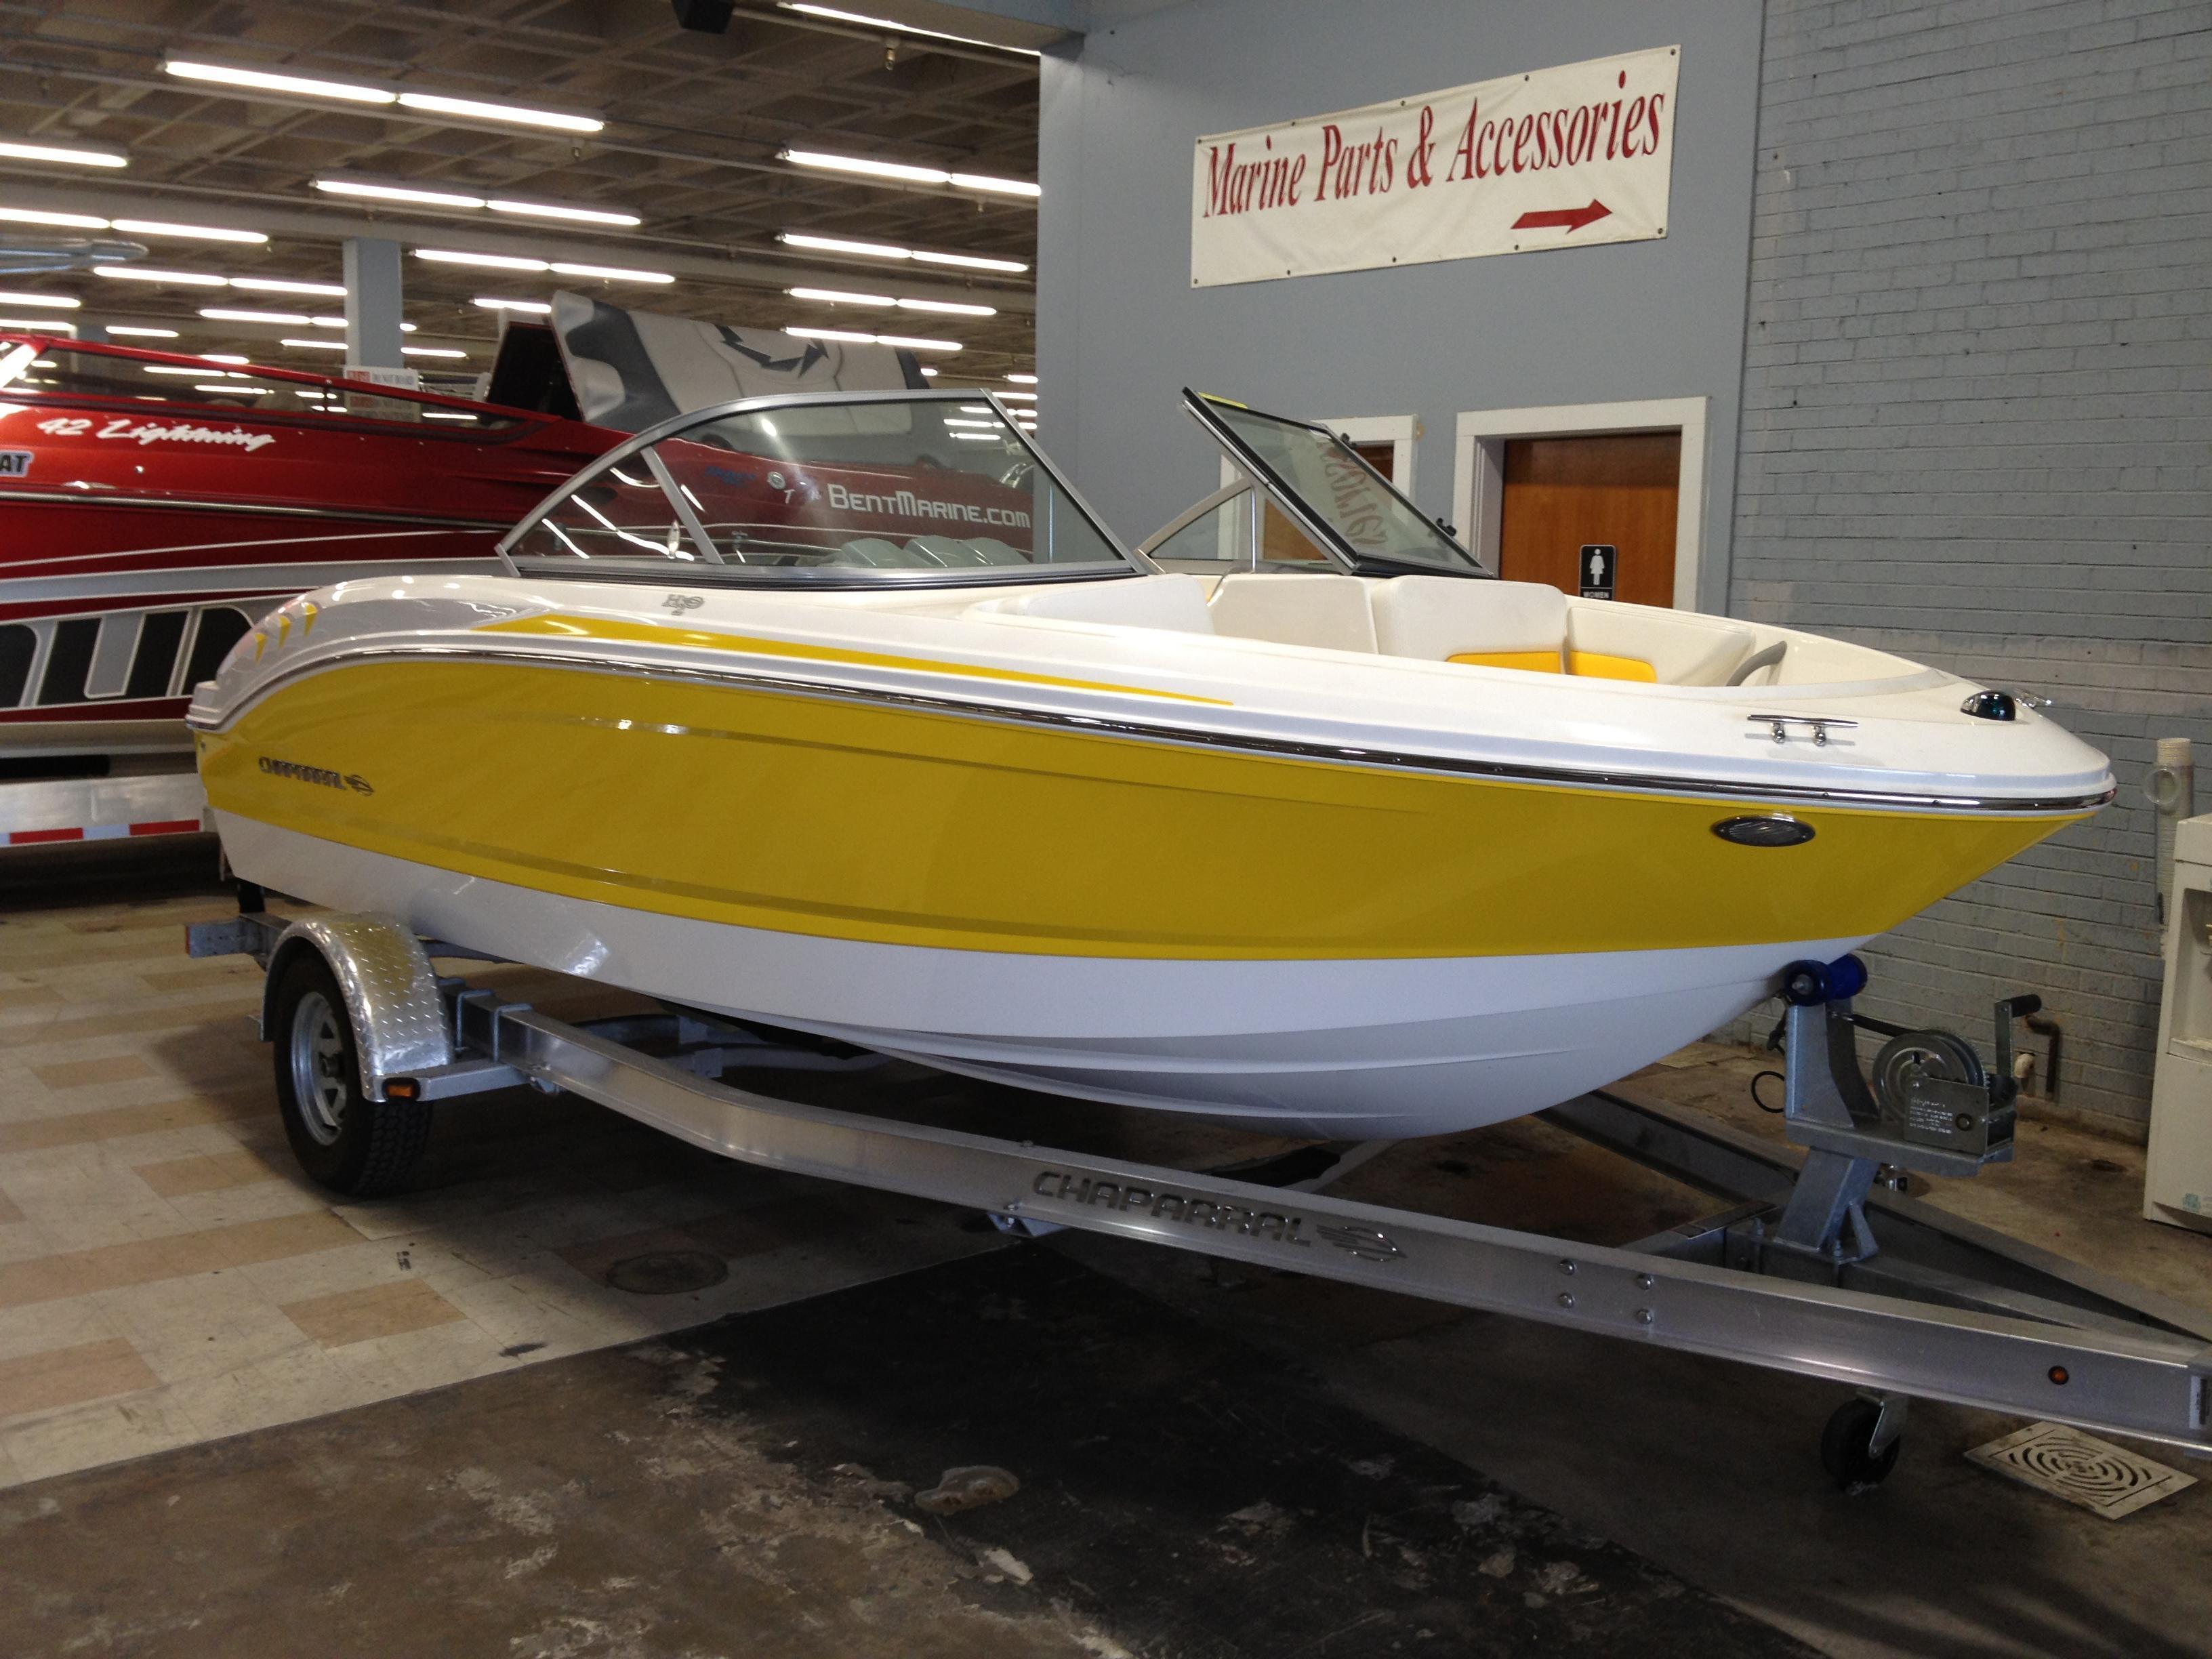 Chaparral 18 Sport H2O, Metairie